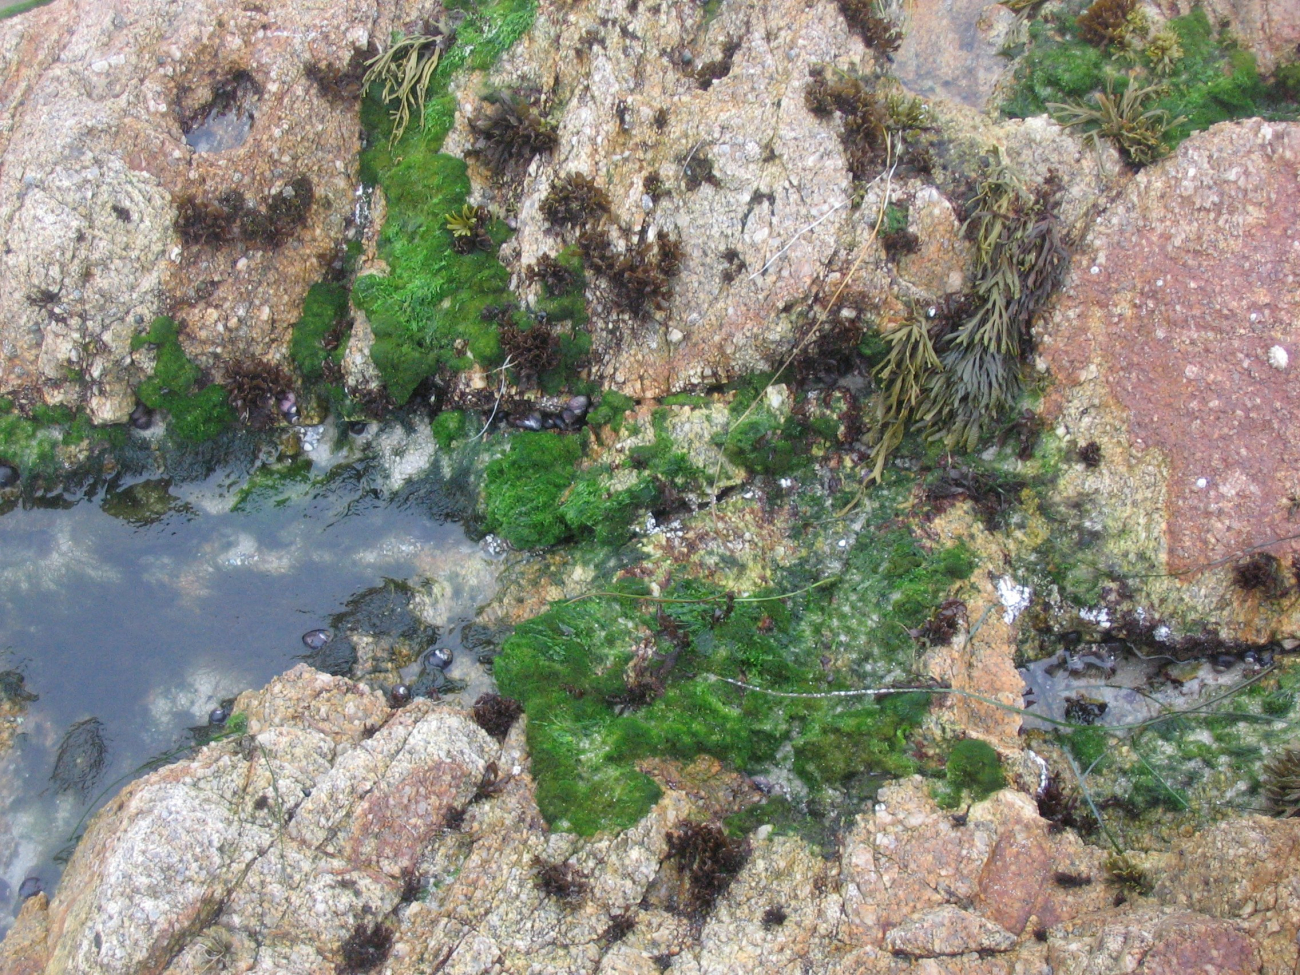 Bright green algae and at least two species of seaweed attached to rocks at thelimit of hight tide and spray